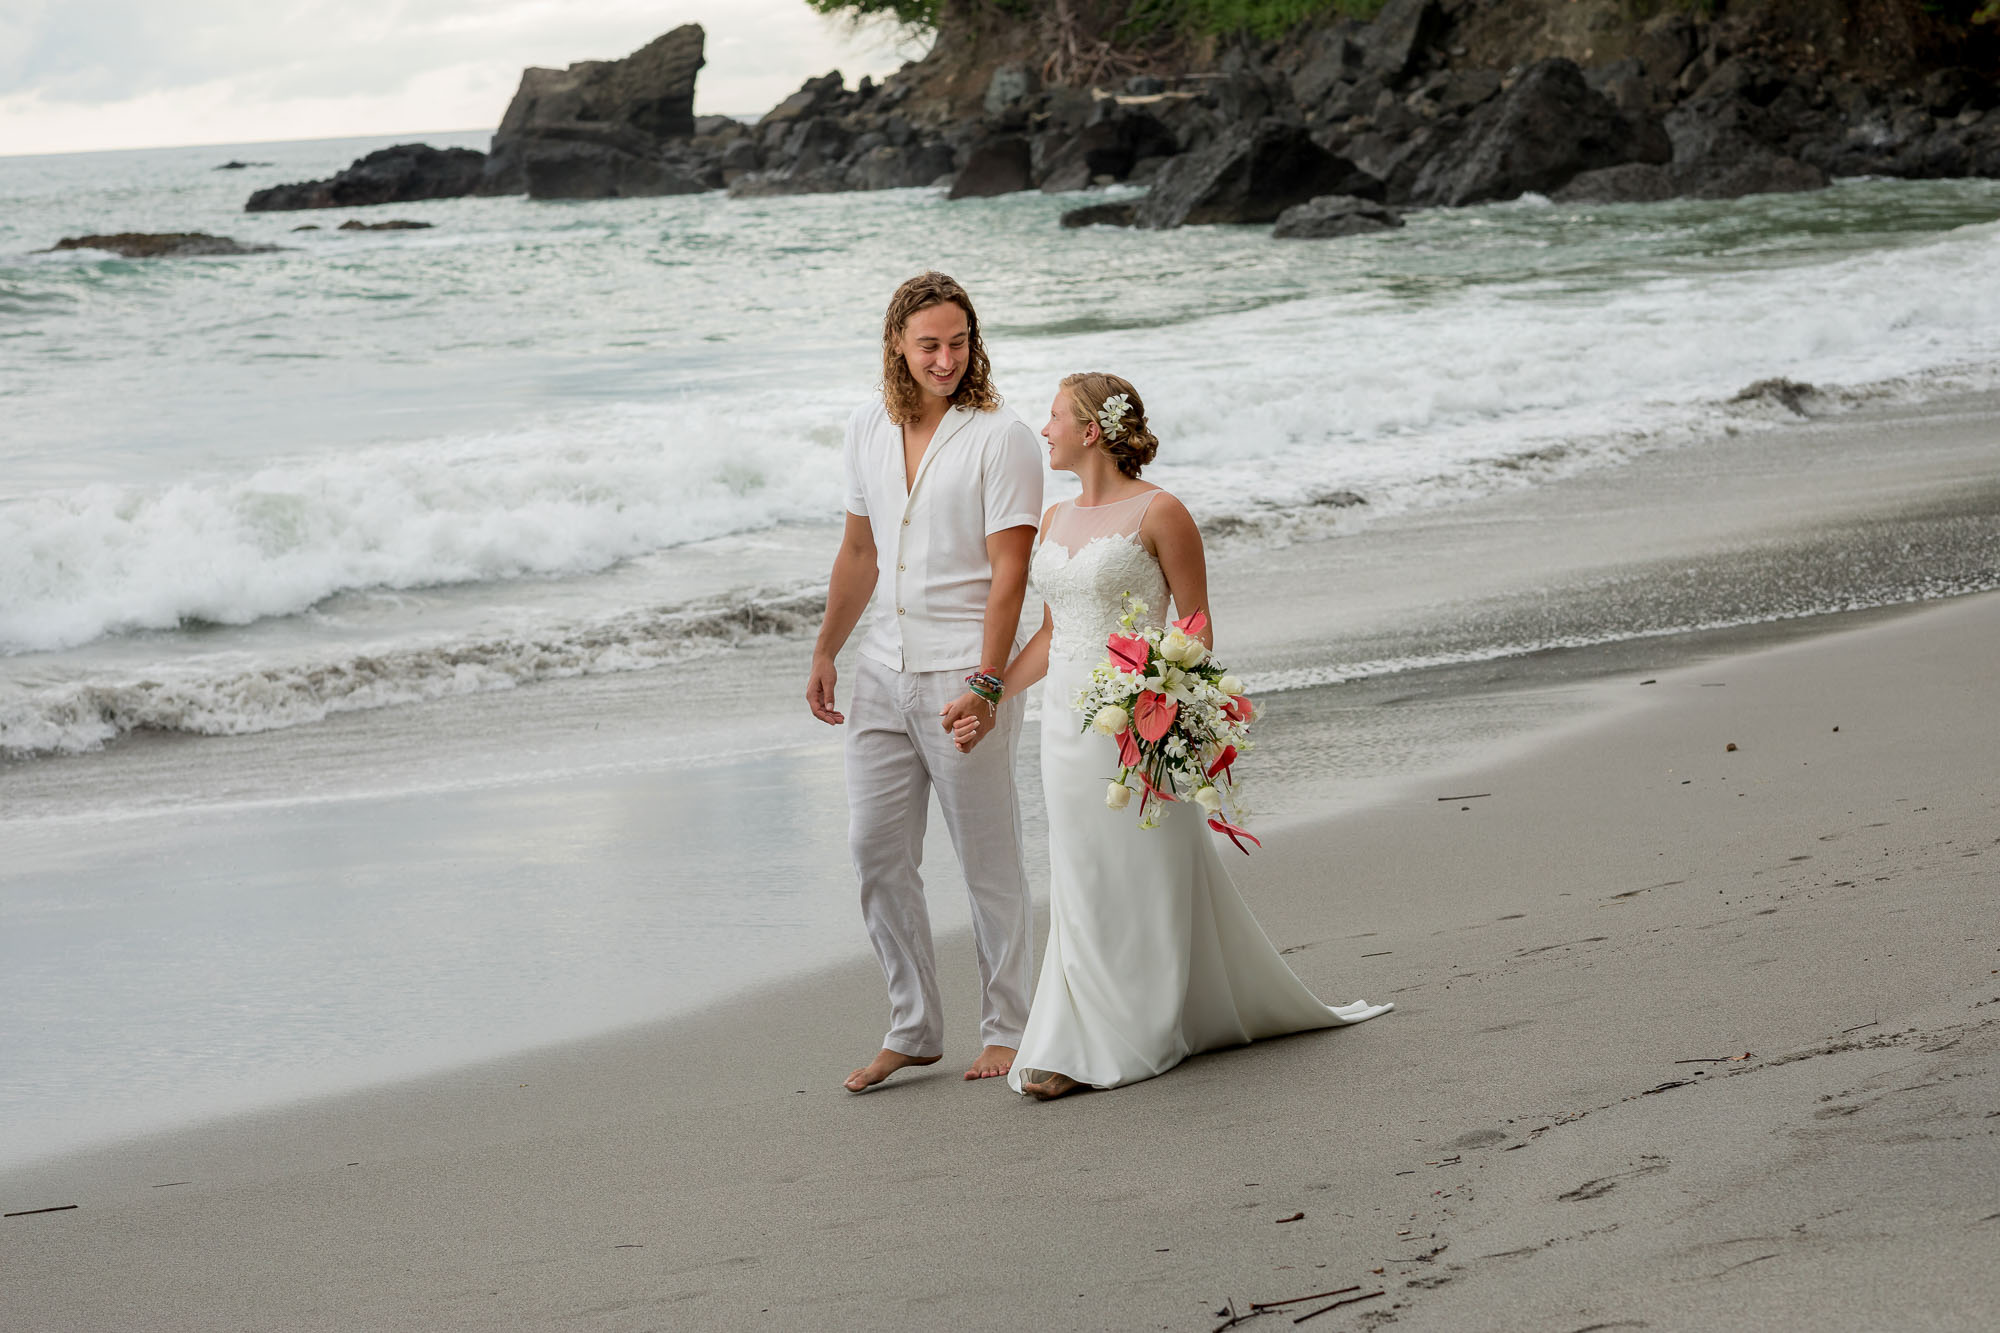 Bride and groom walking along the beach together